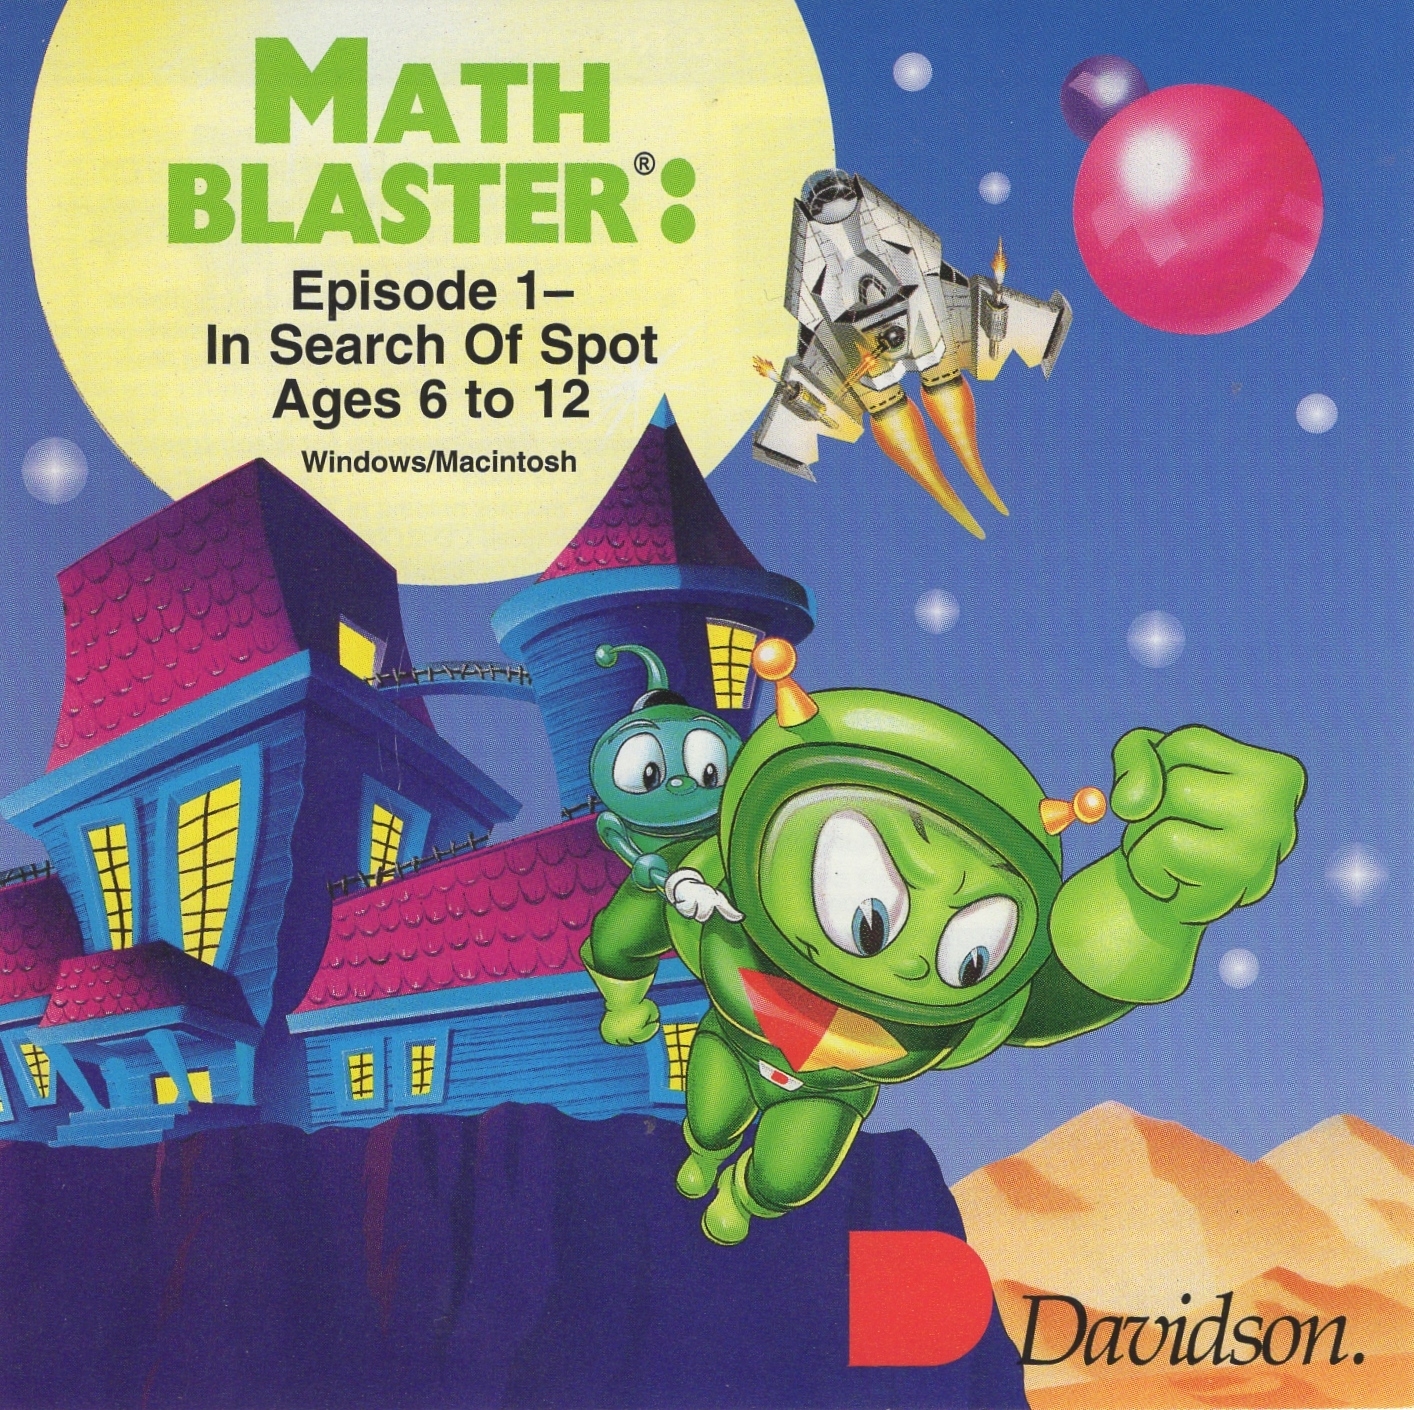 Math Blaster: Episode One - In Search of Spot official promotional image -  MobyGames